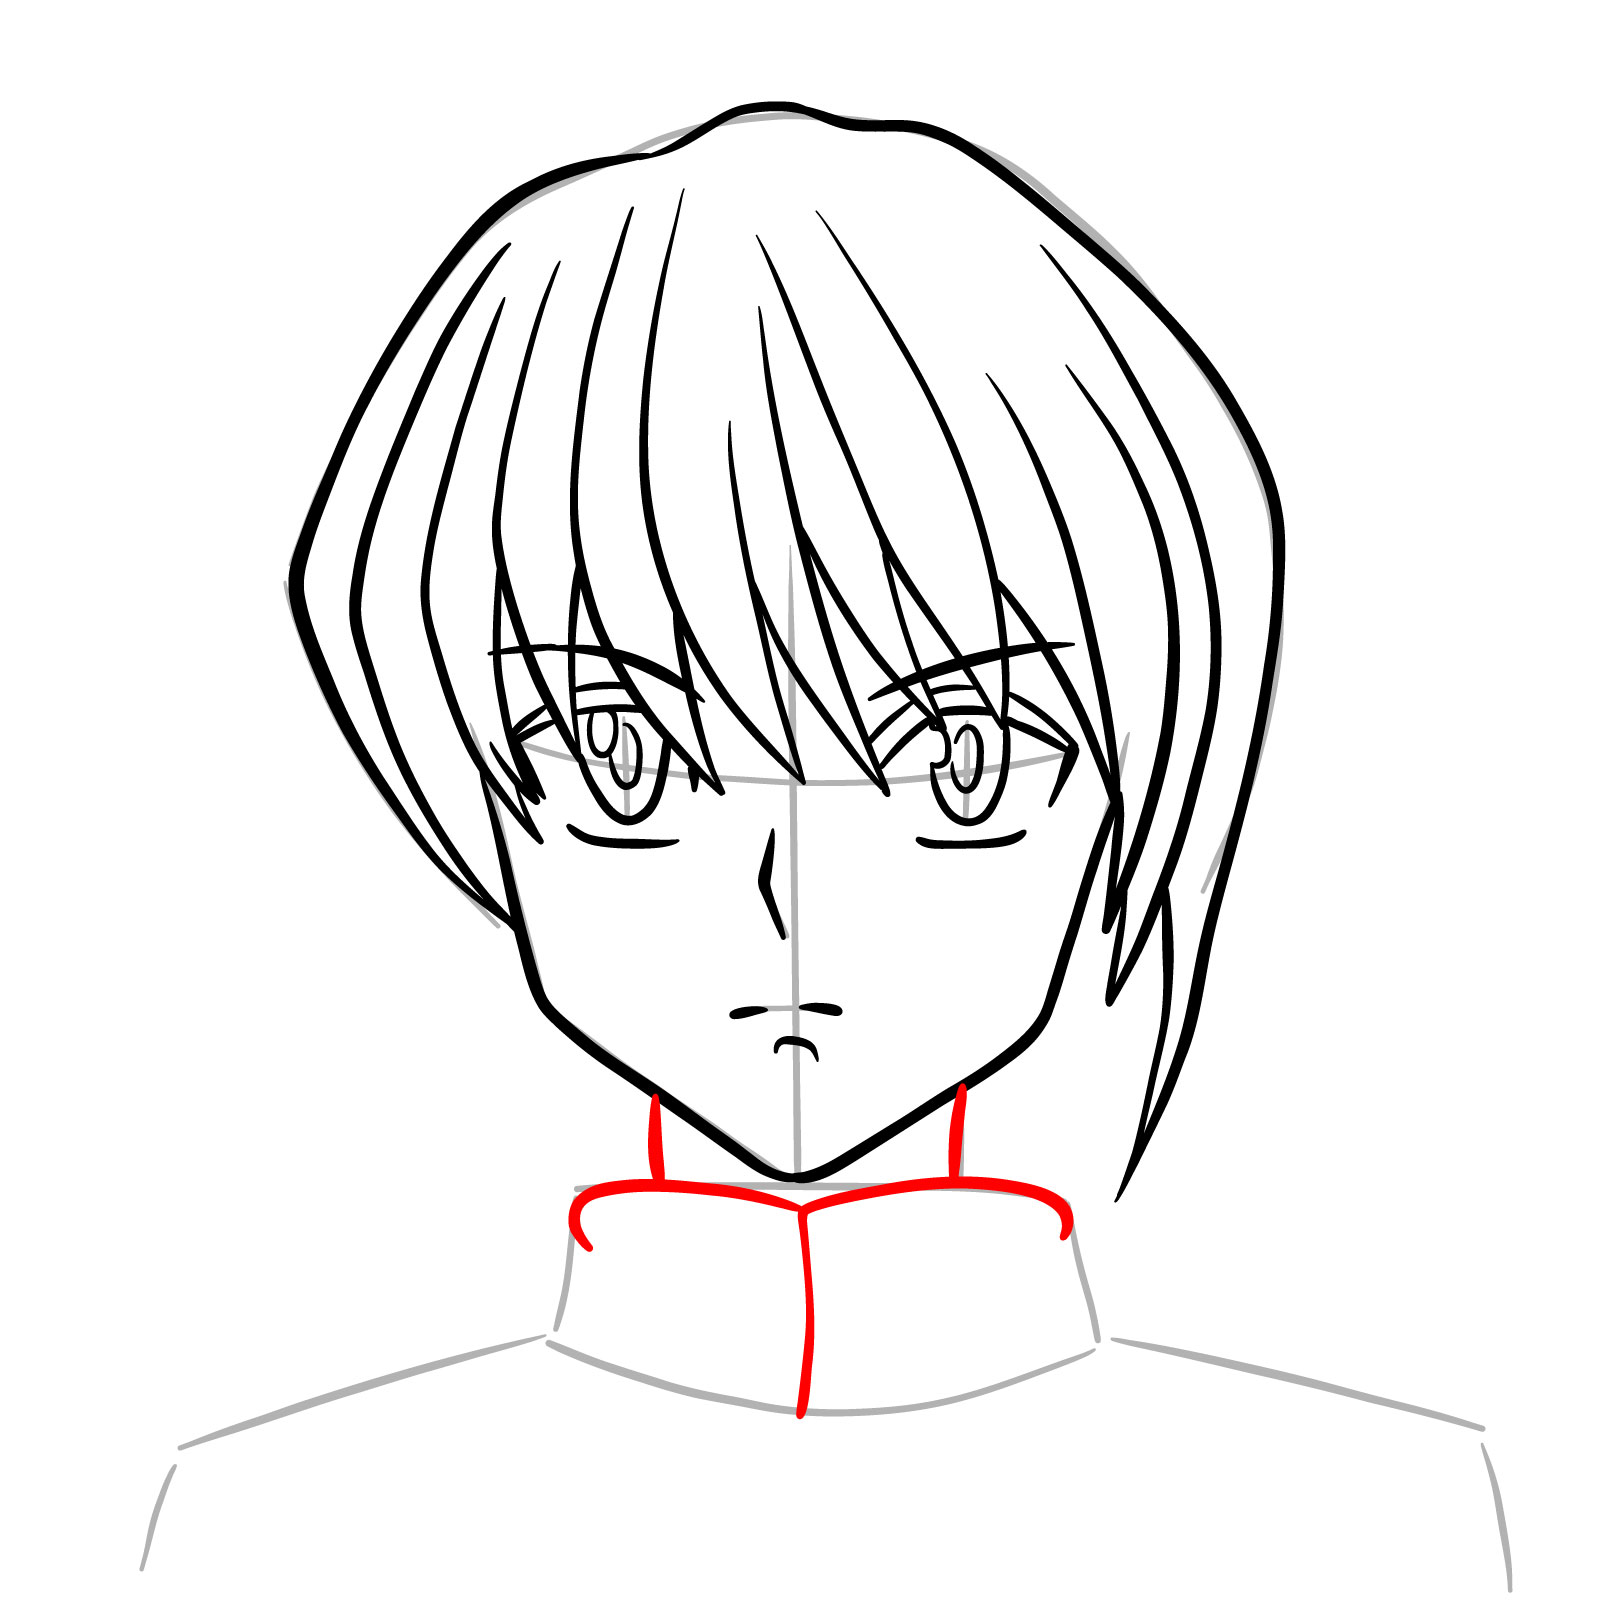 How to draw the face of Kurapika - step 13